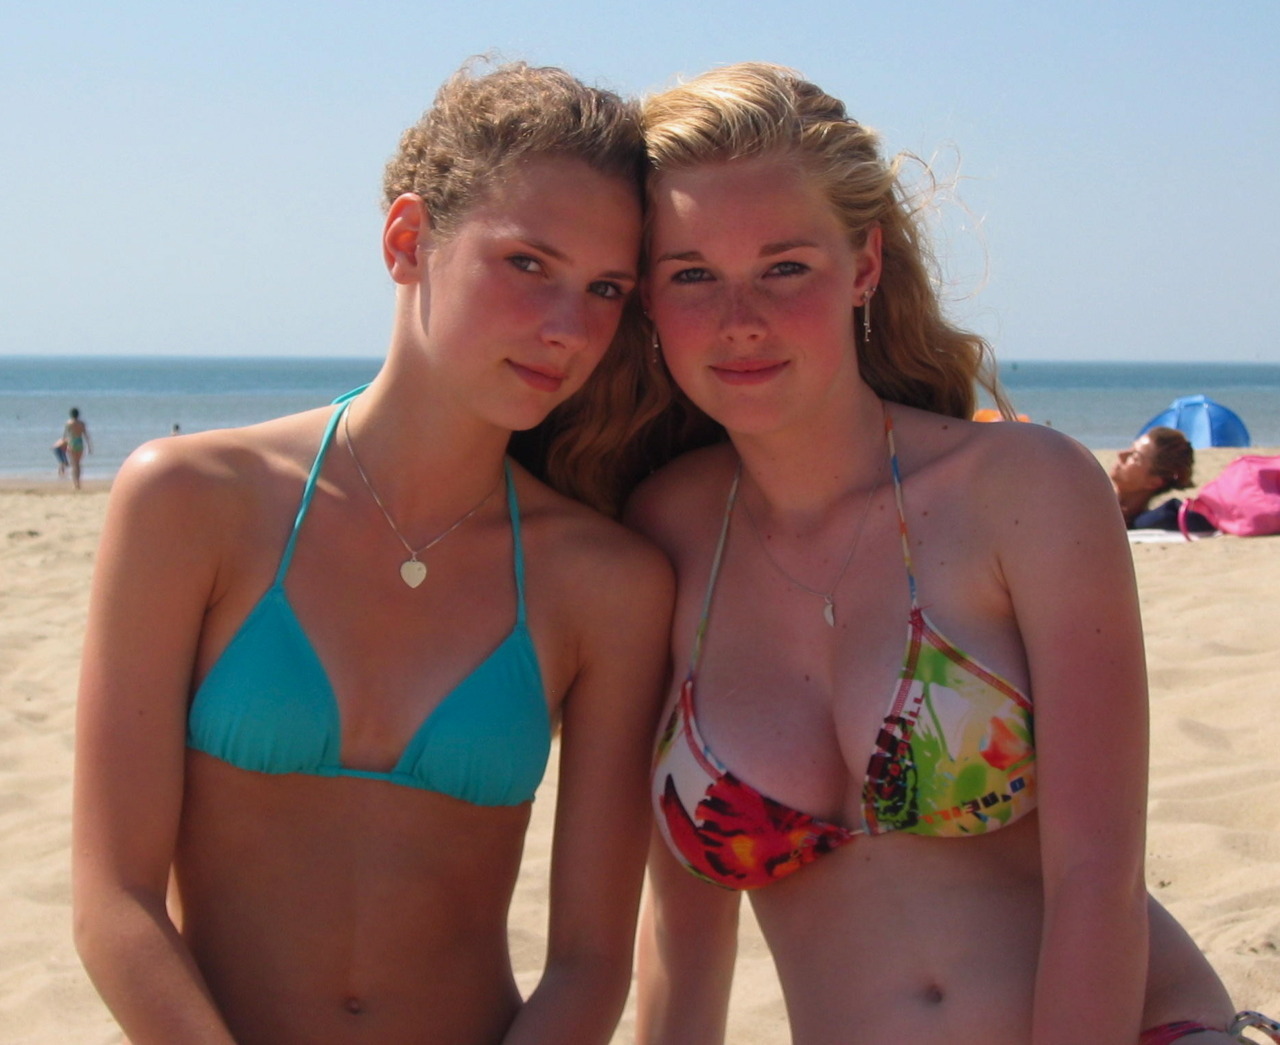 Young teen girls with amazing bodies